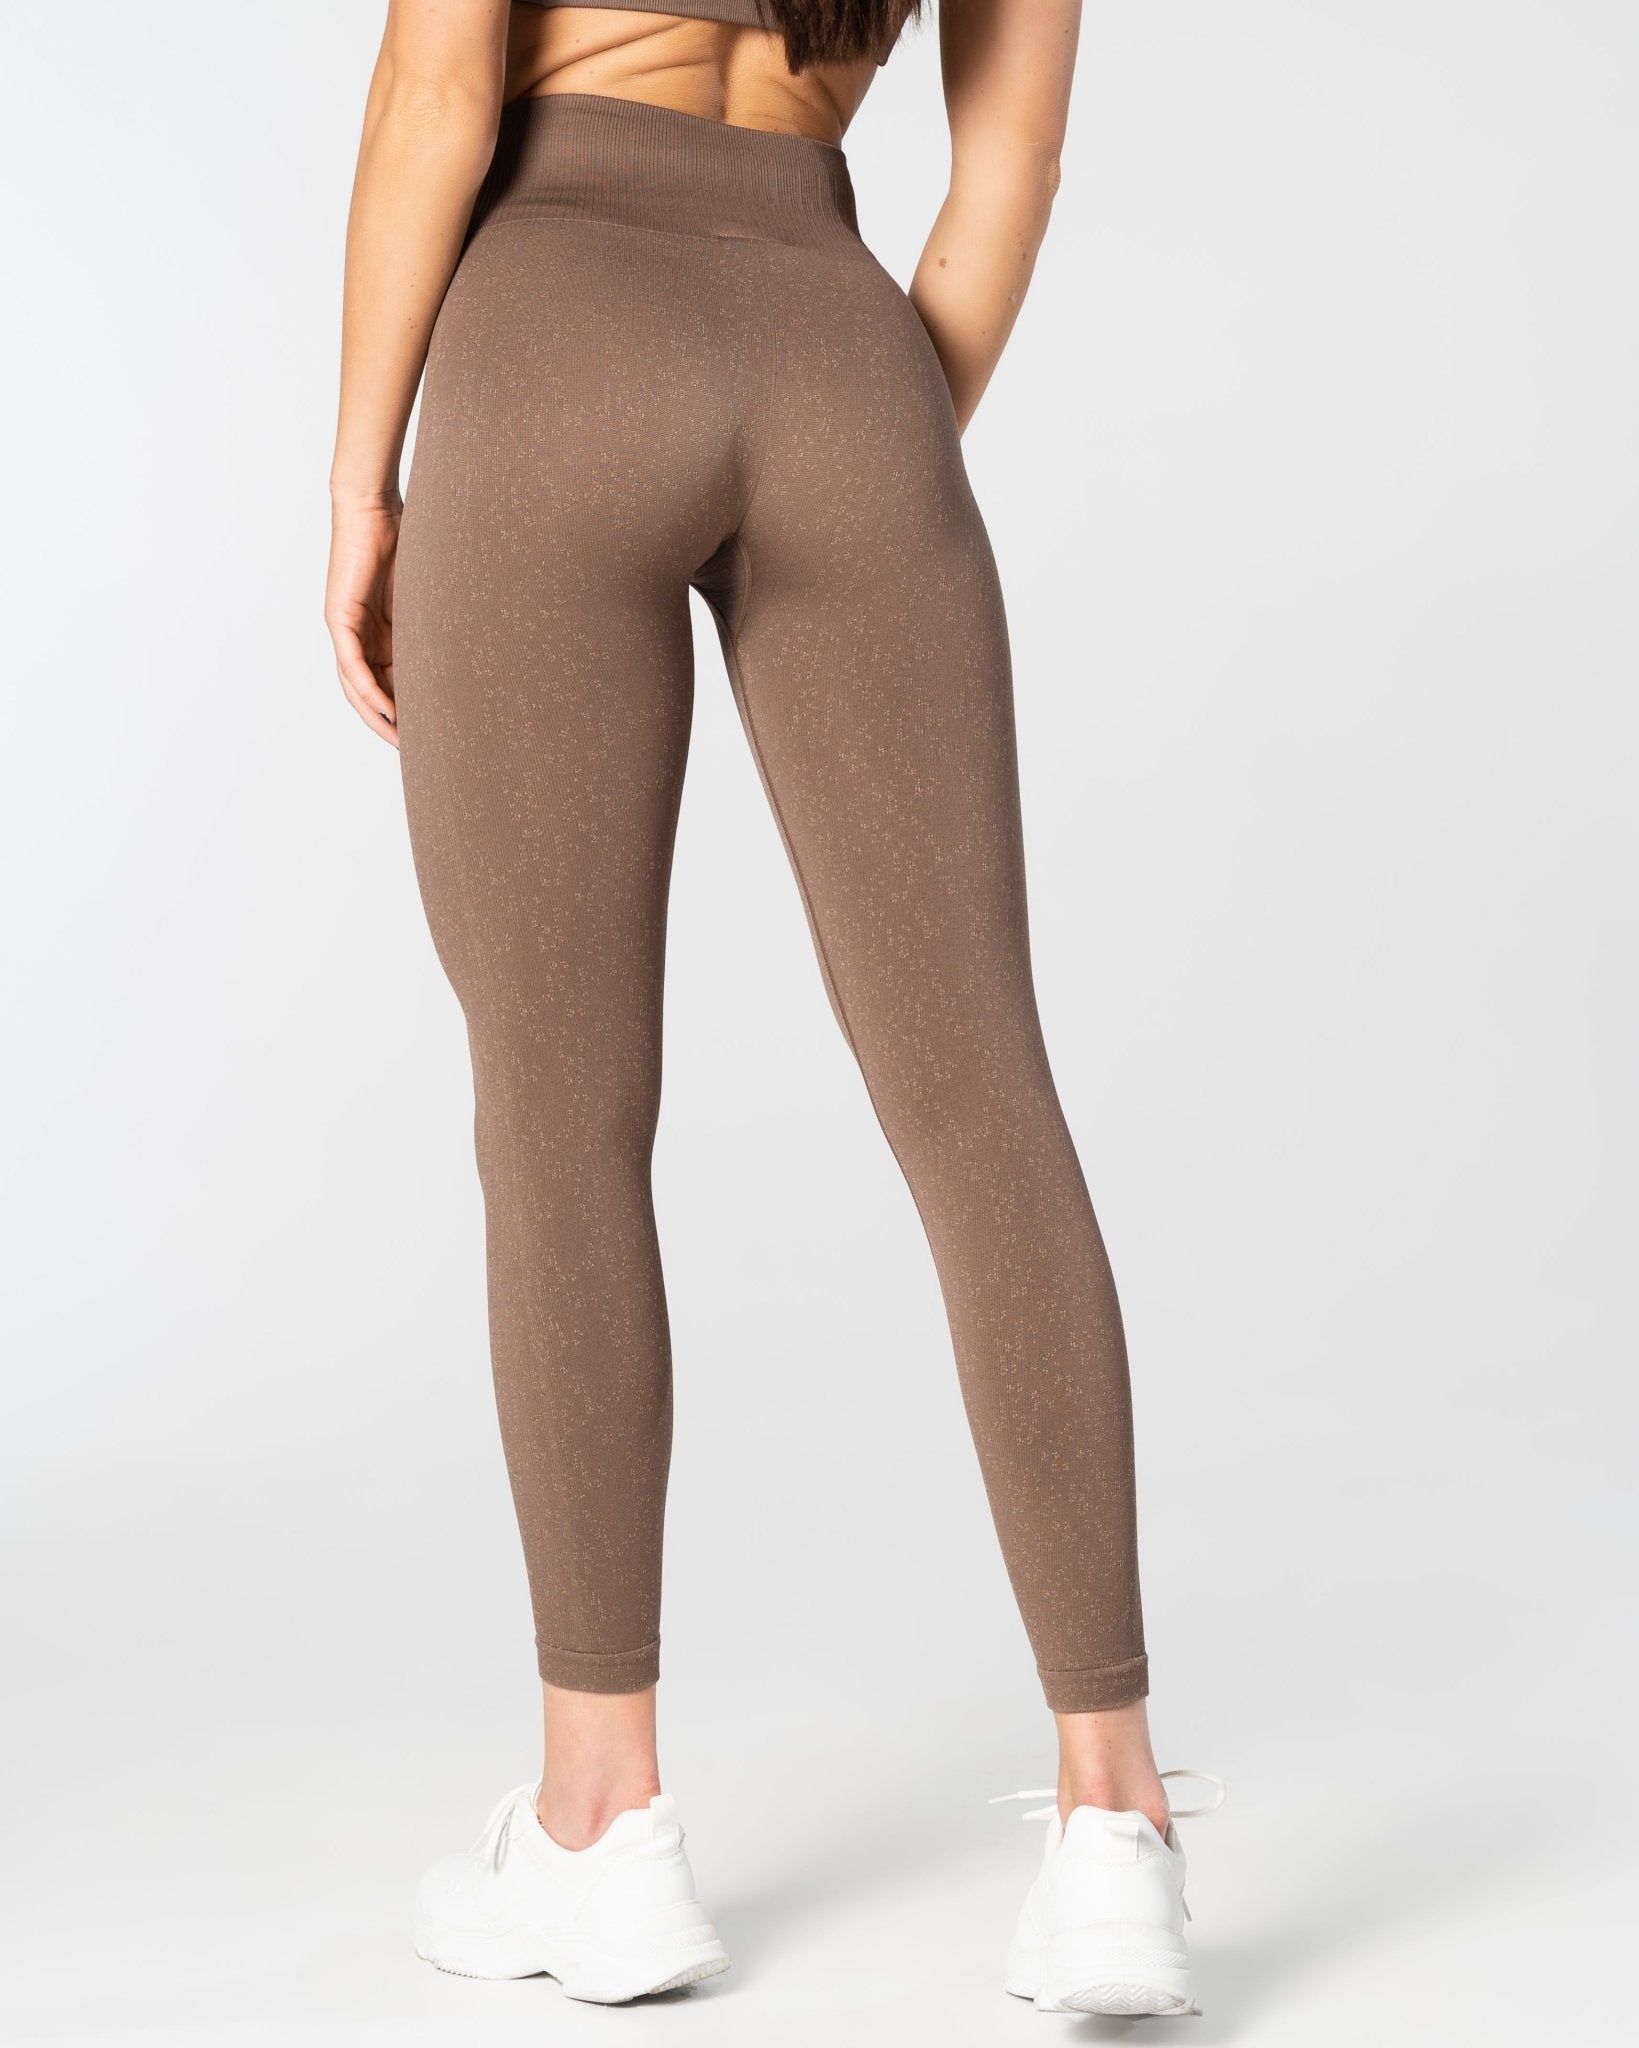 Rise Tights - Brown - RELODE